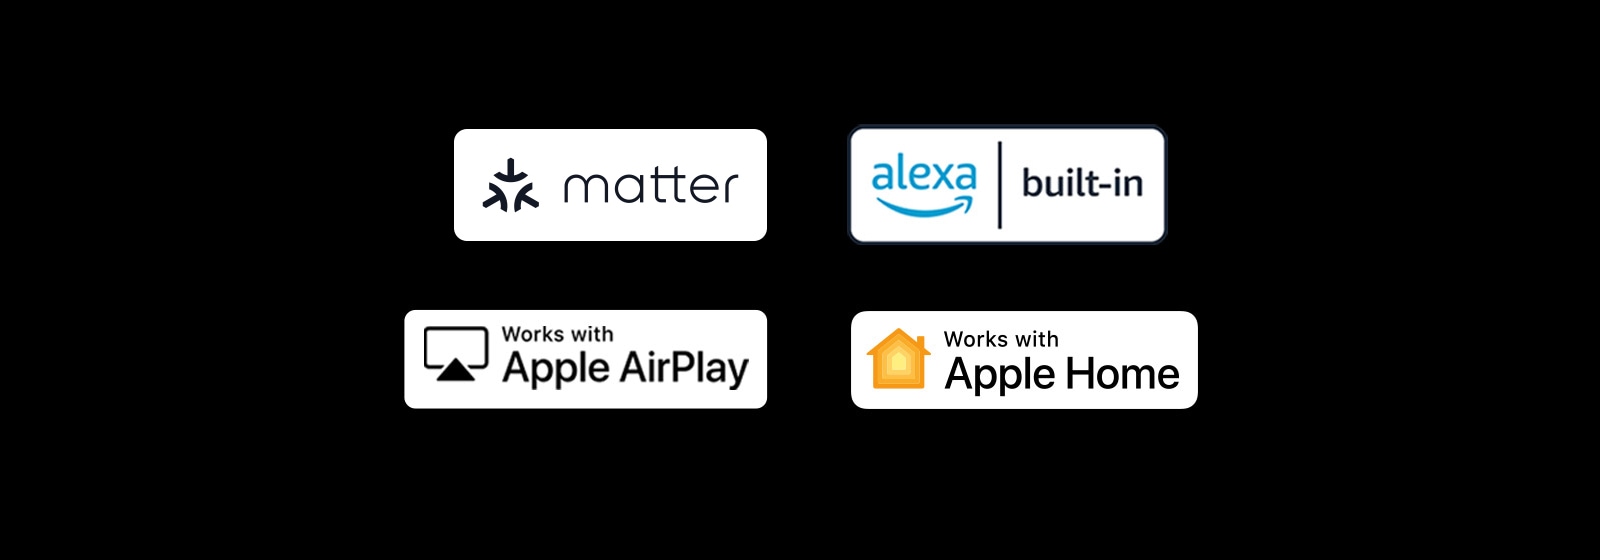 Logo for Built-in Alexa Logo for Works with Apple Airplay Logo for Works with Apple Home Logo for Works with Matter